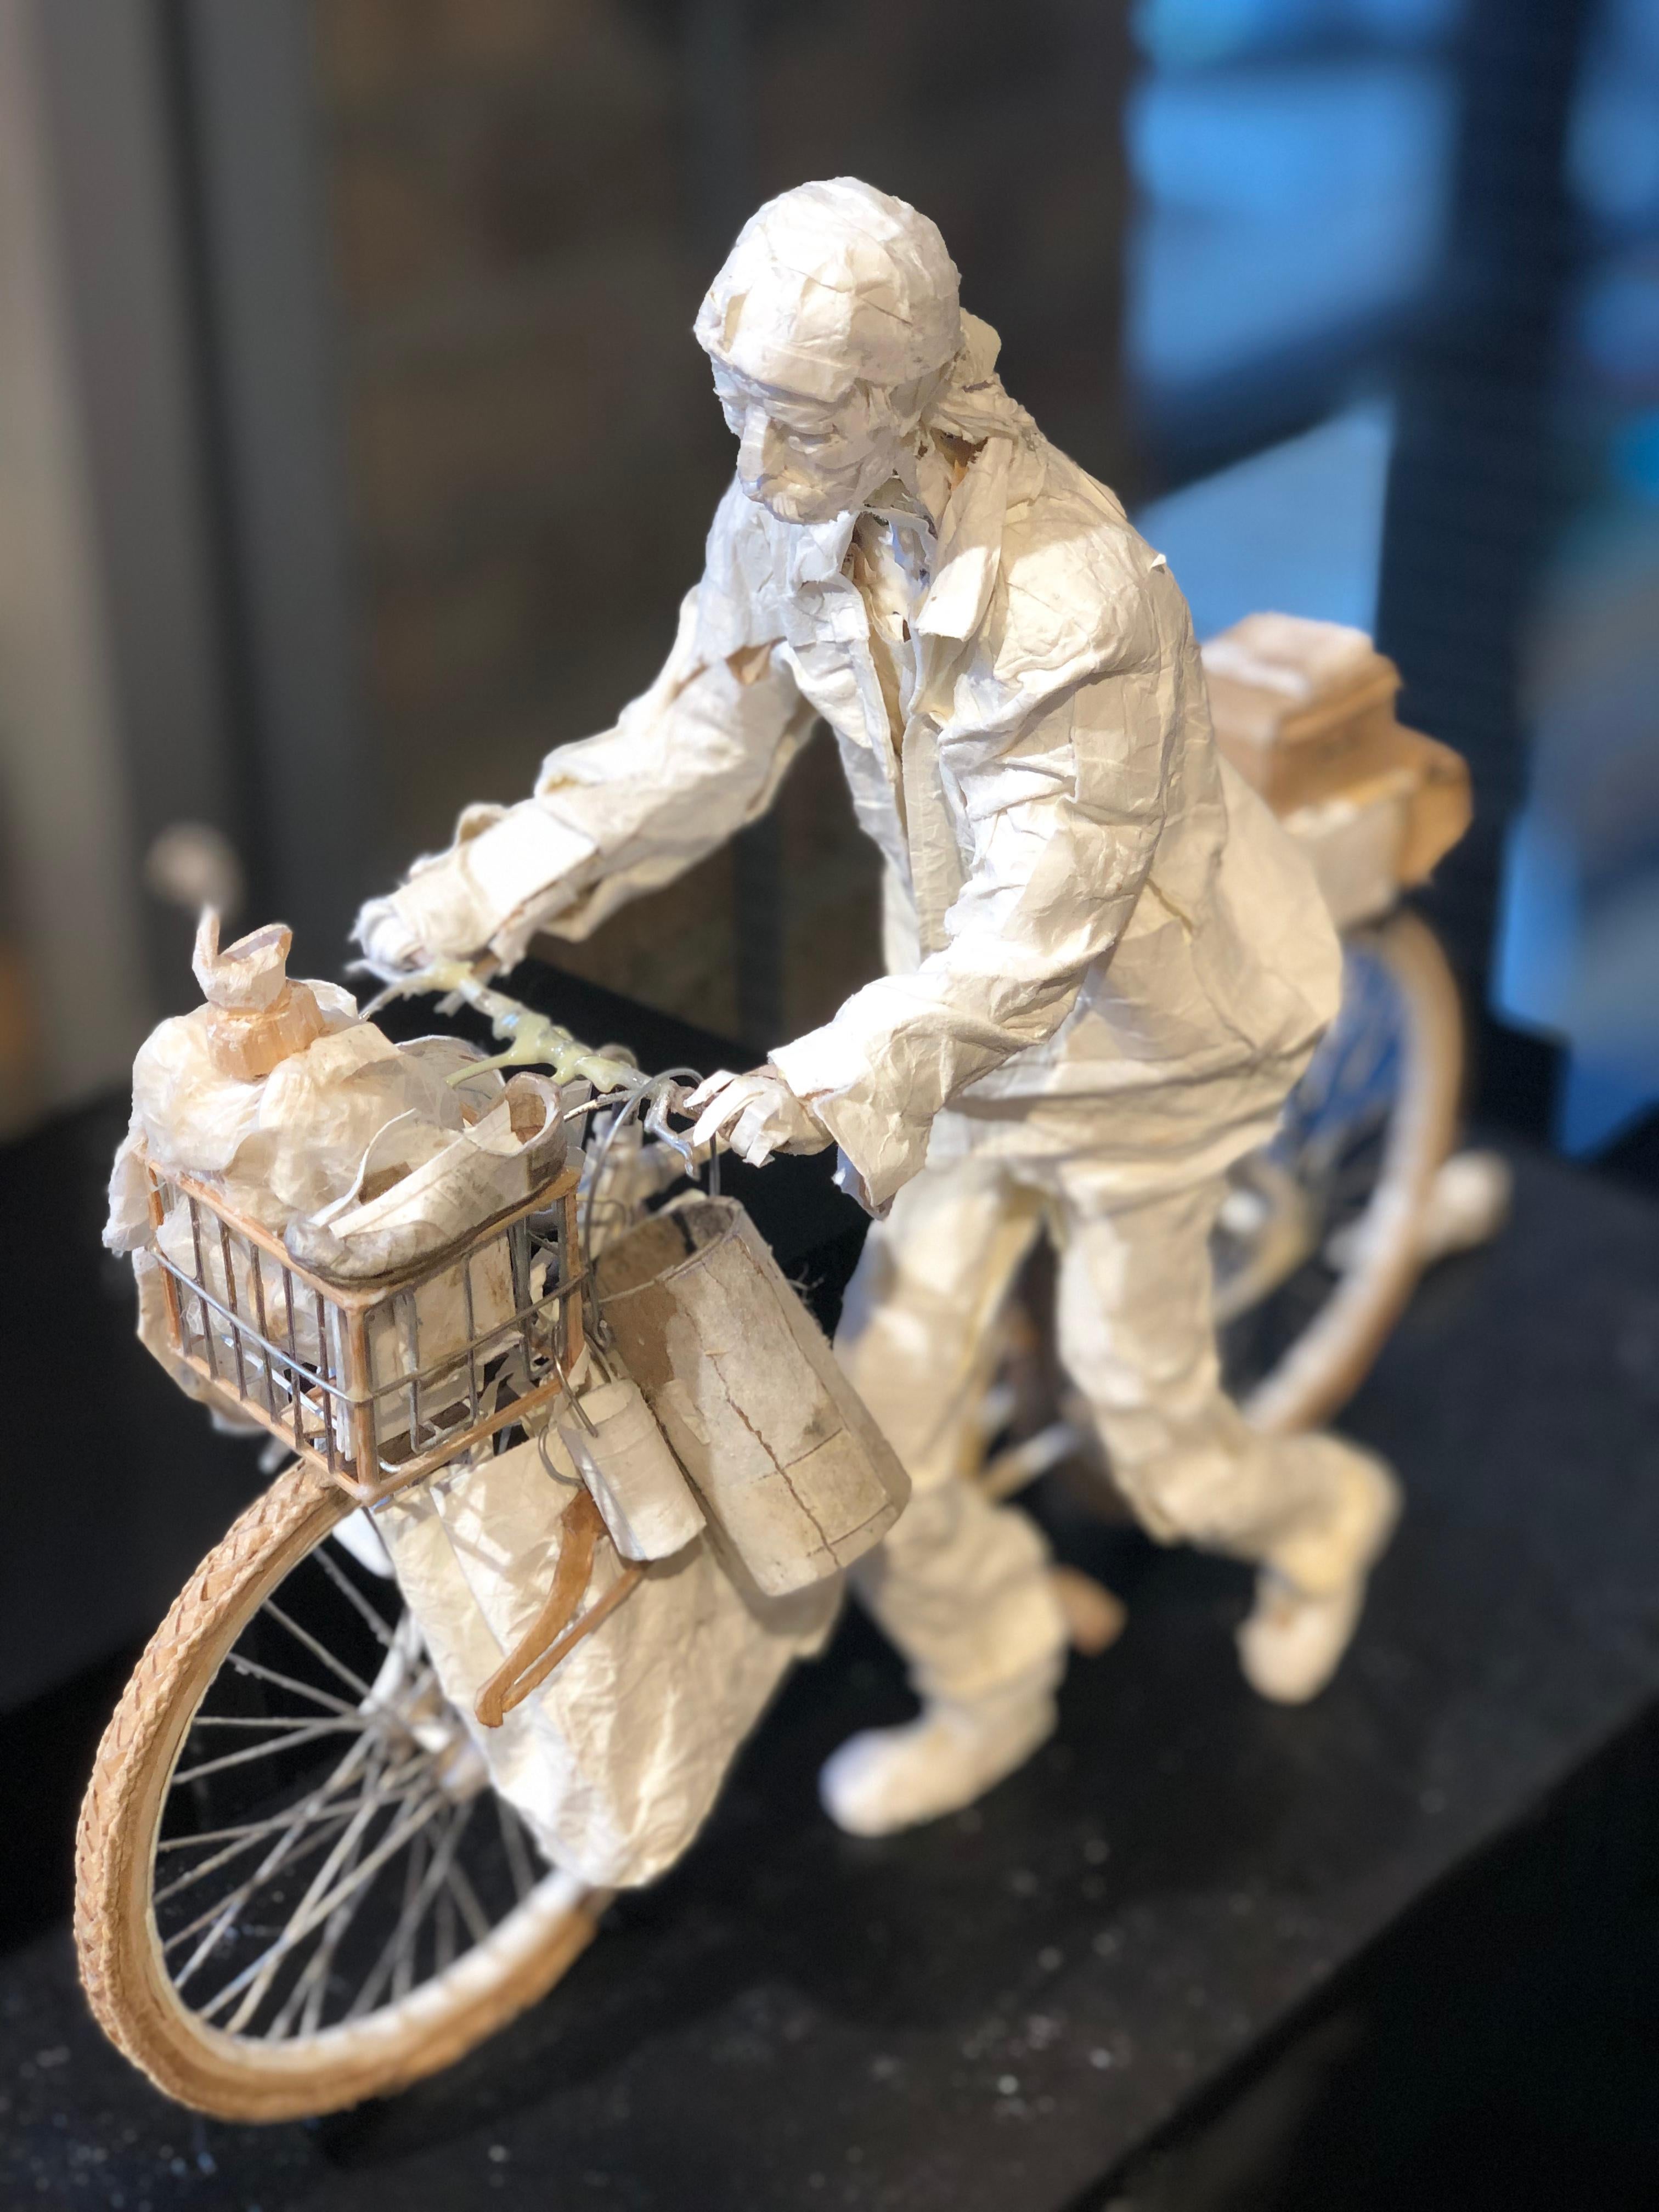 This realistic sculpture is created from scraps of paper and glue.  Some of the details in the bike are made using simple materials such as wire, string and wood.  The sculpture is inspired by the characters found in cities around the world who pick